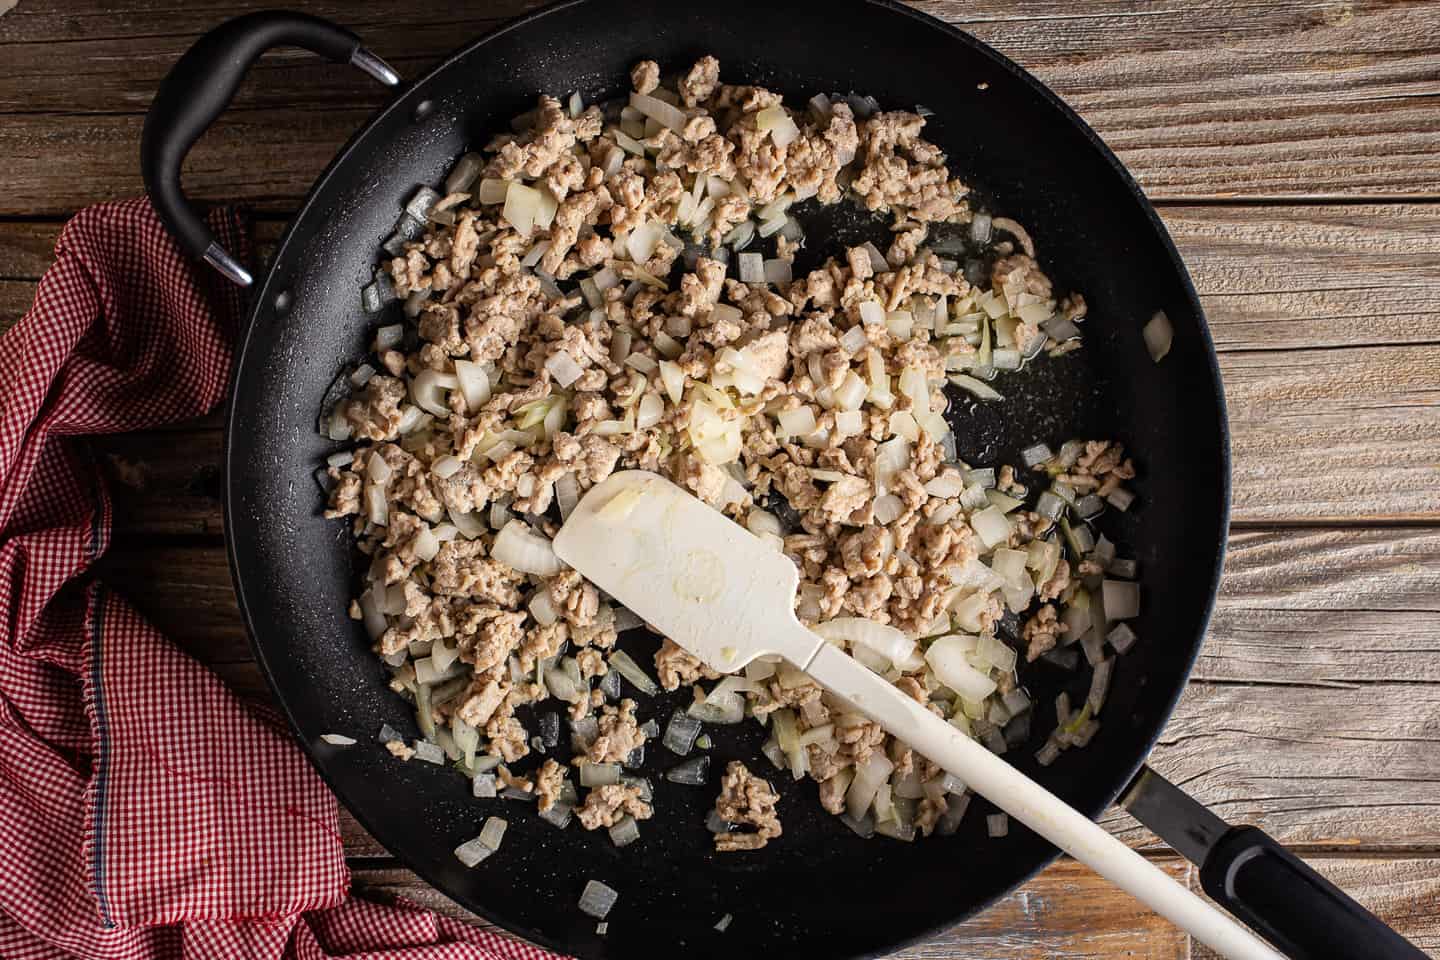 Cooking ground chicken and onions together in a large black skillet.